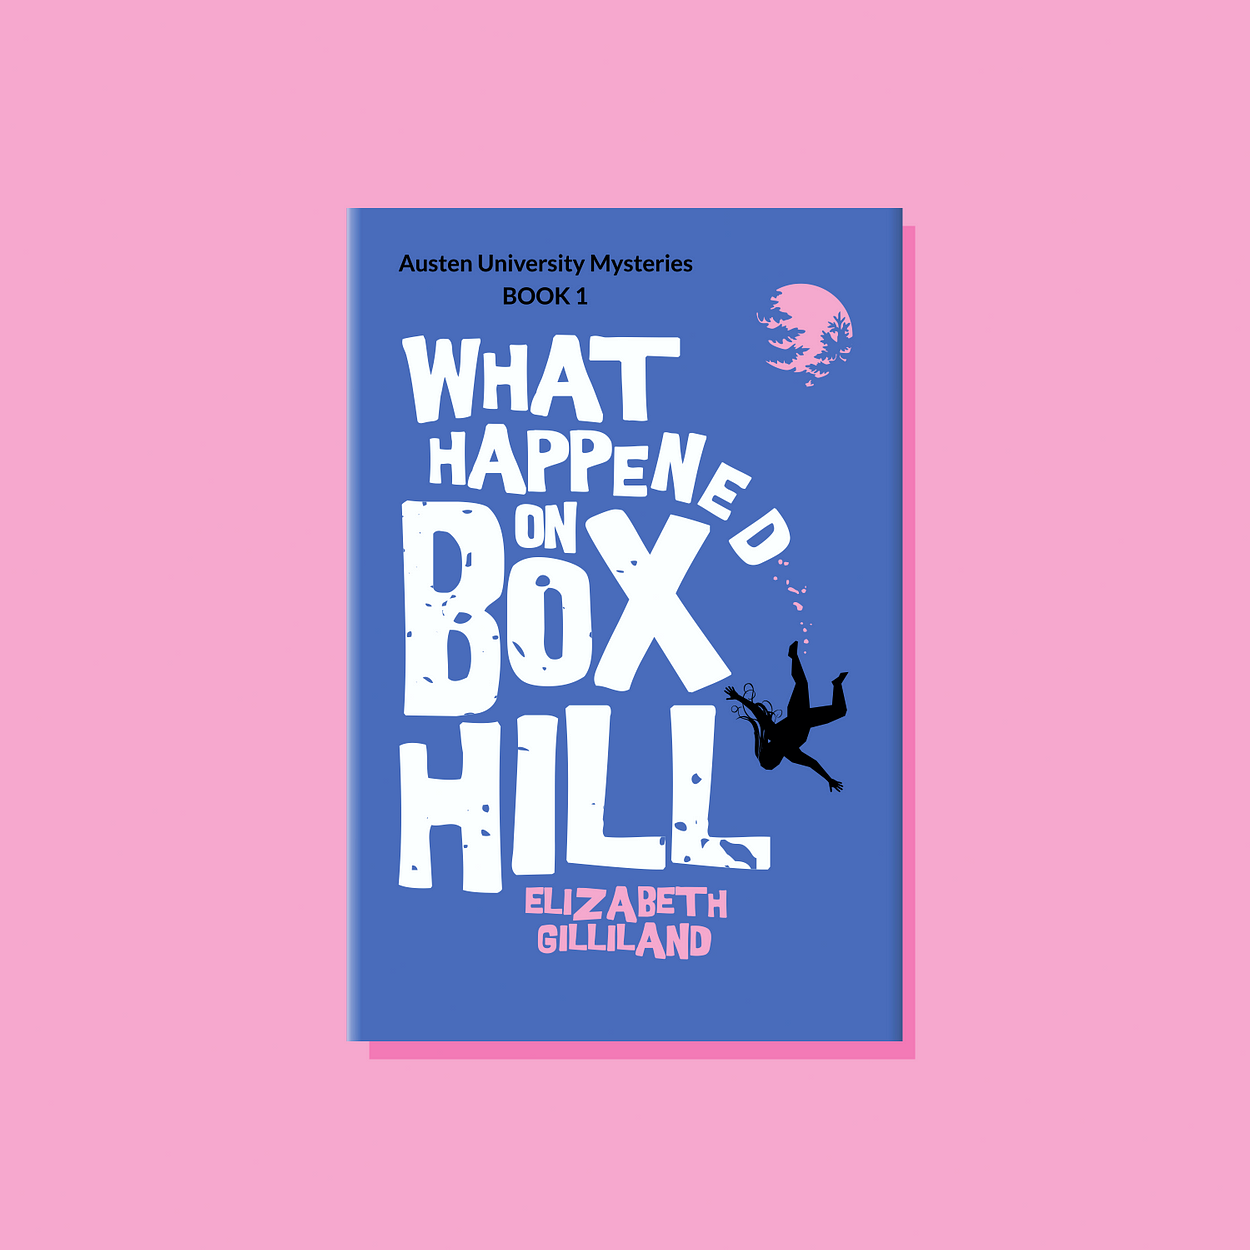 What Happened On Box Hill